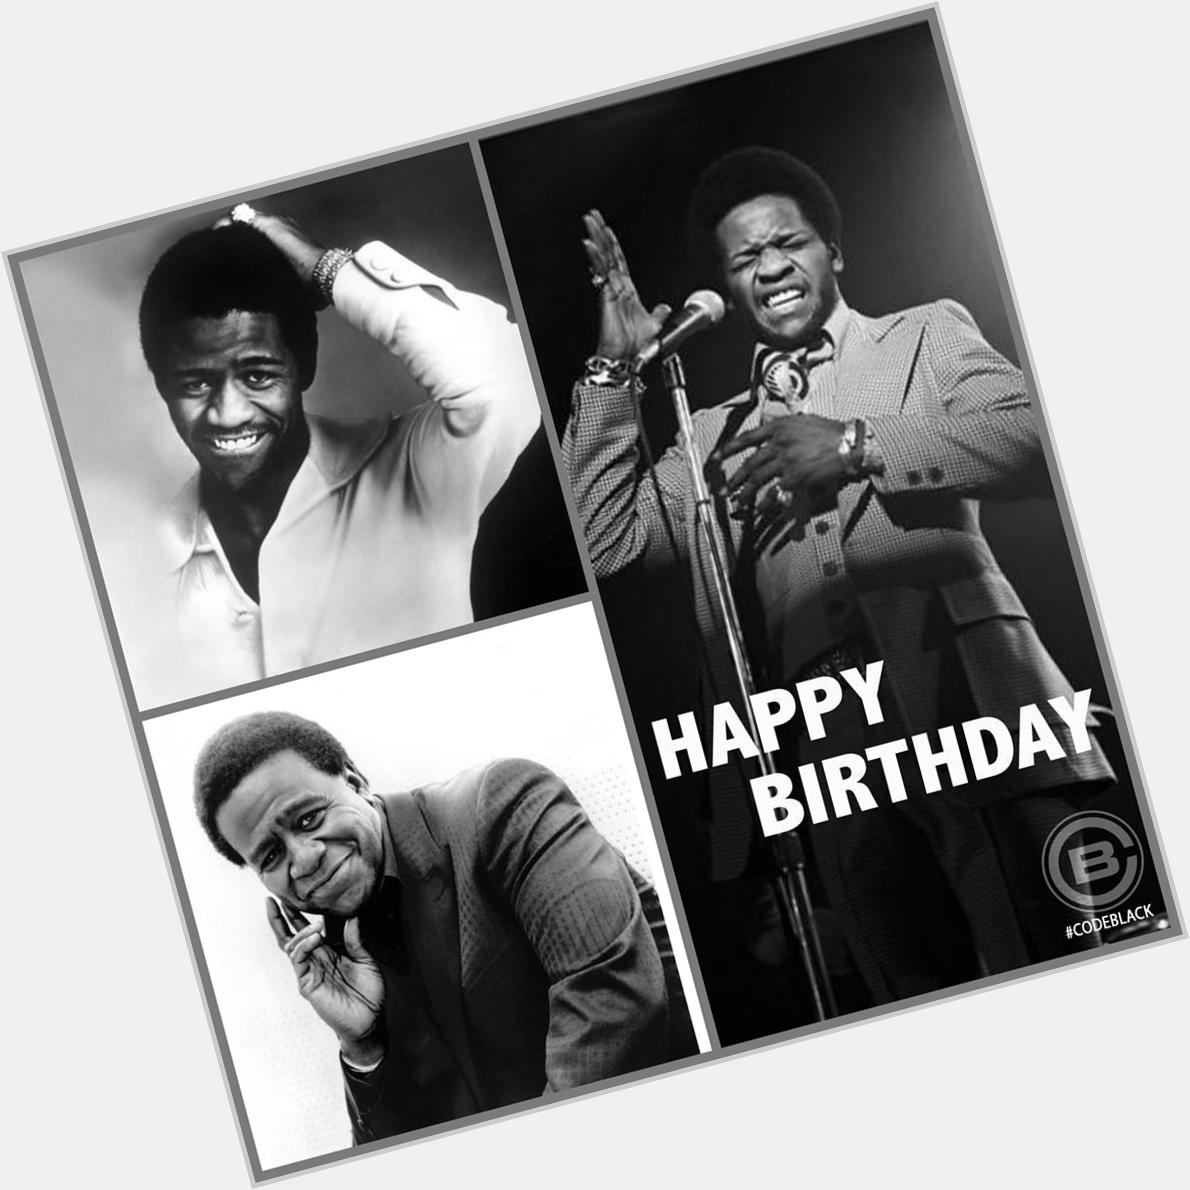 Happy Birthday to the legendary Al Green who turns 69 today.  